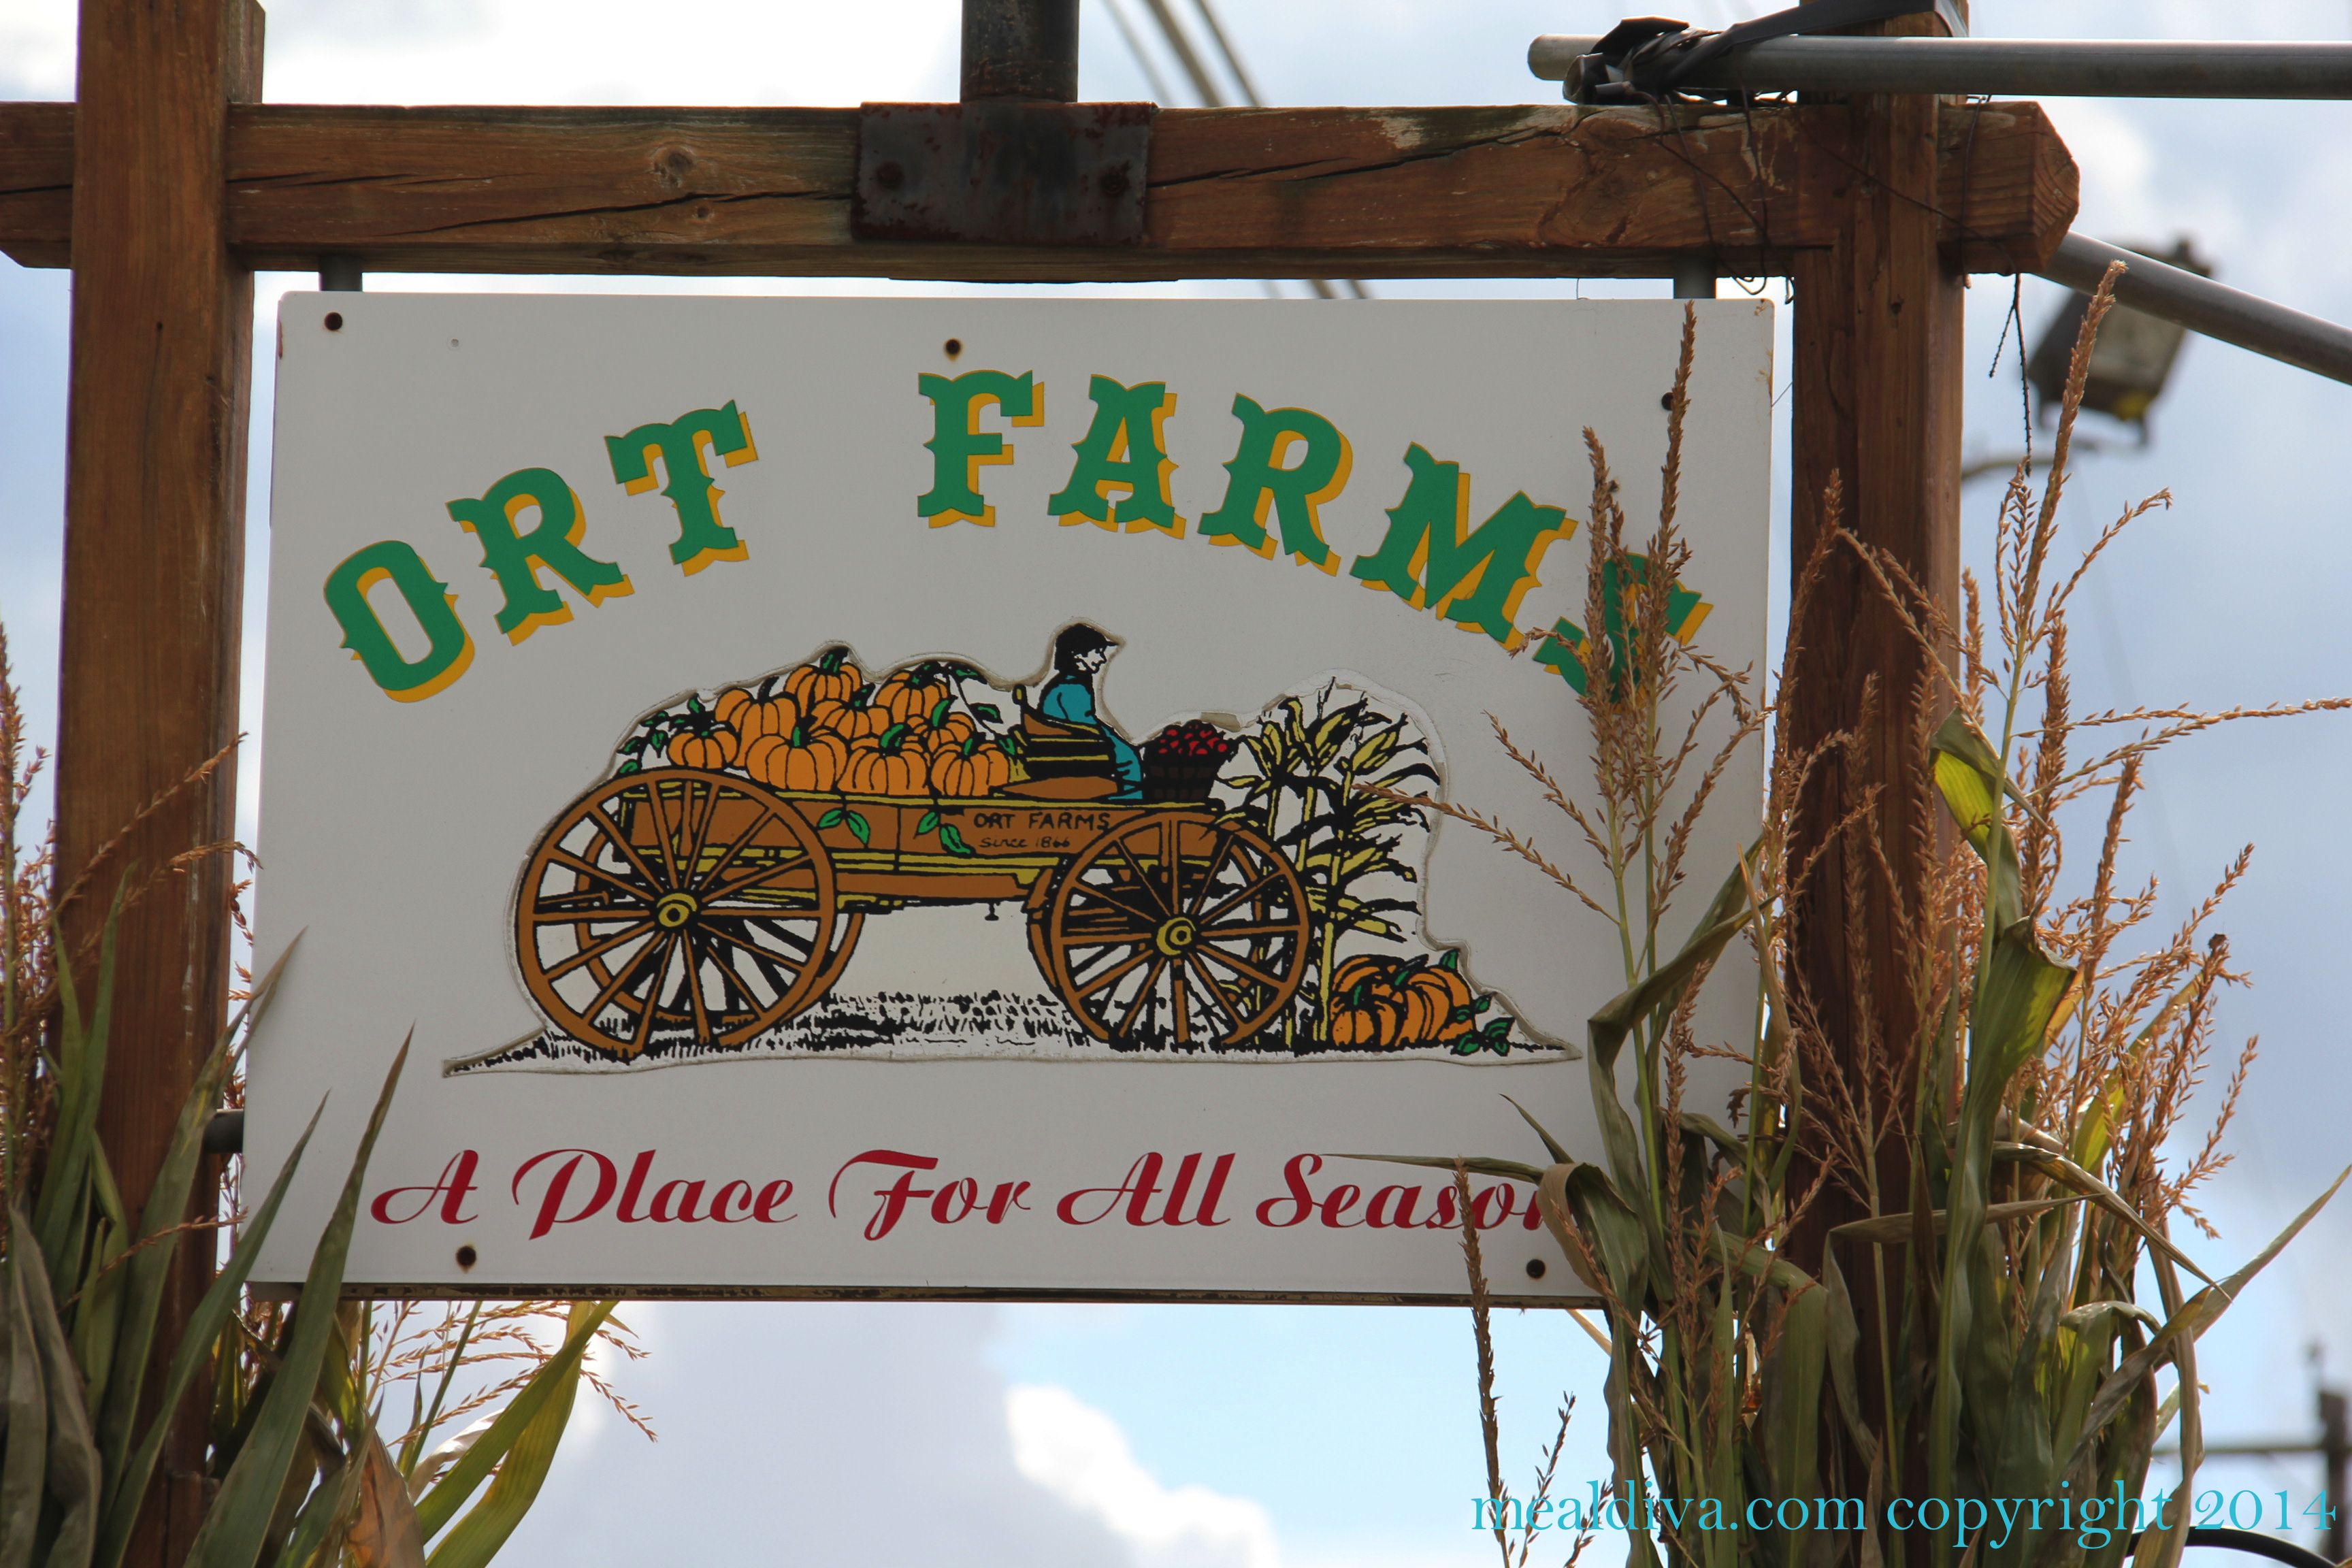 Ort Farms in Long Valley